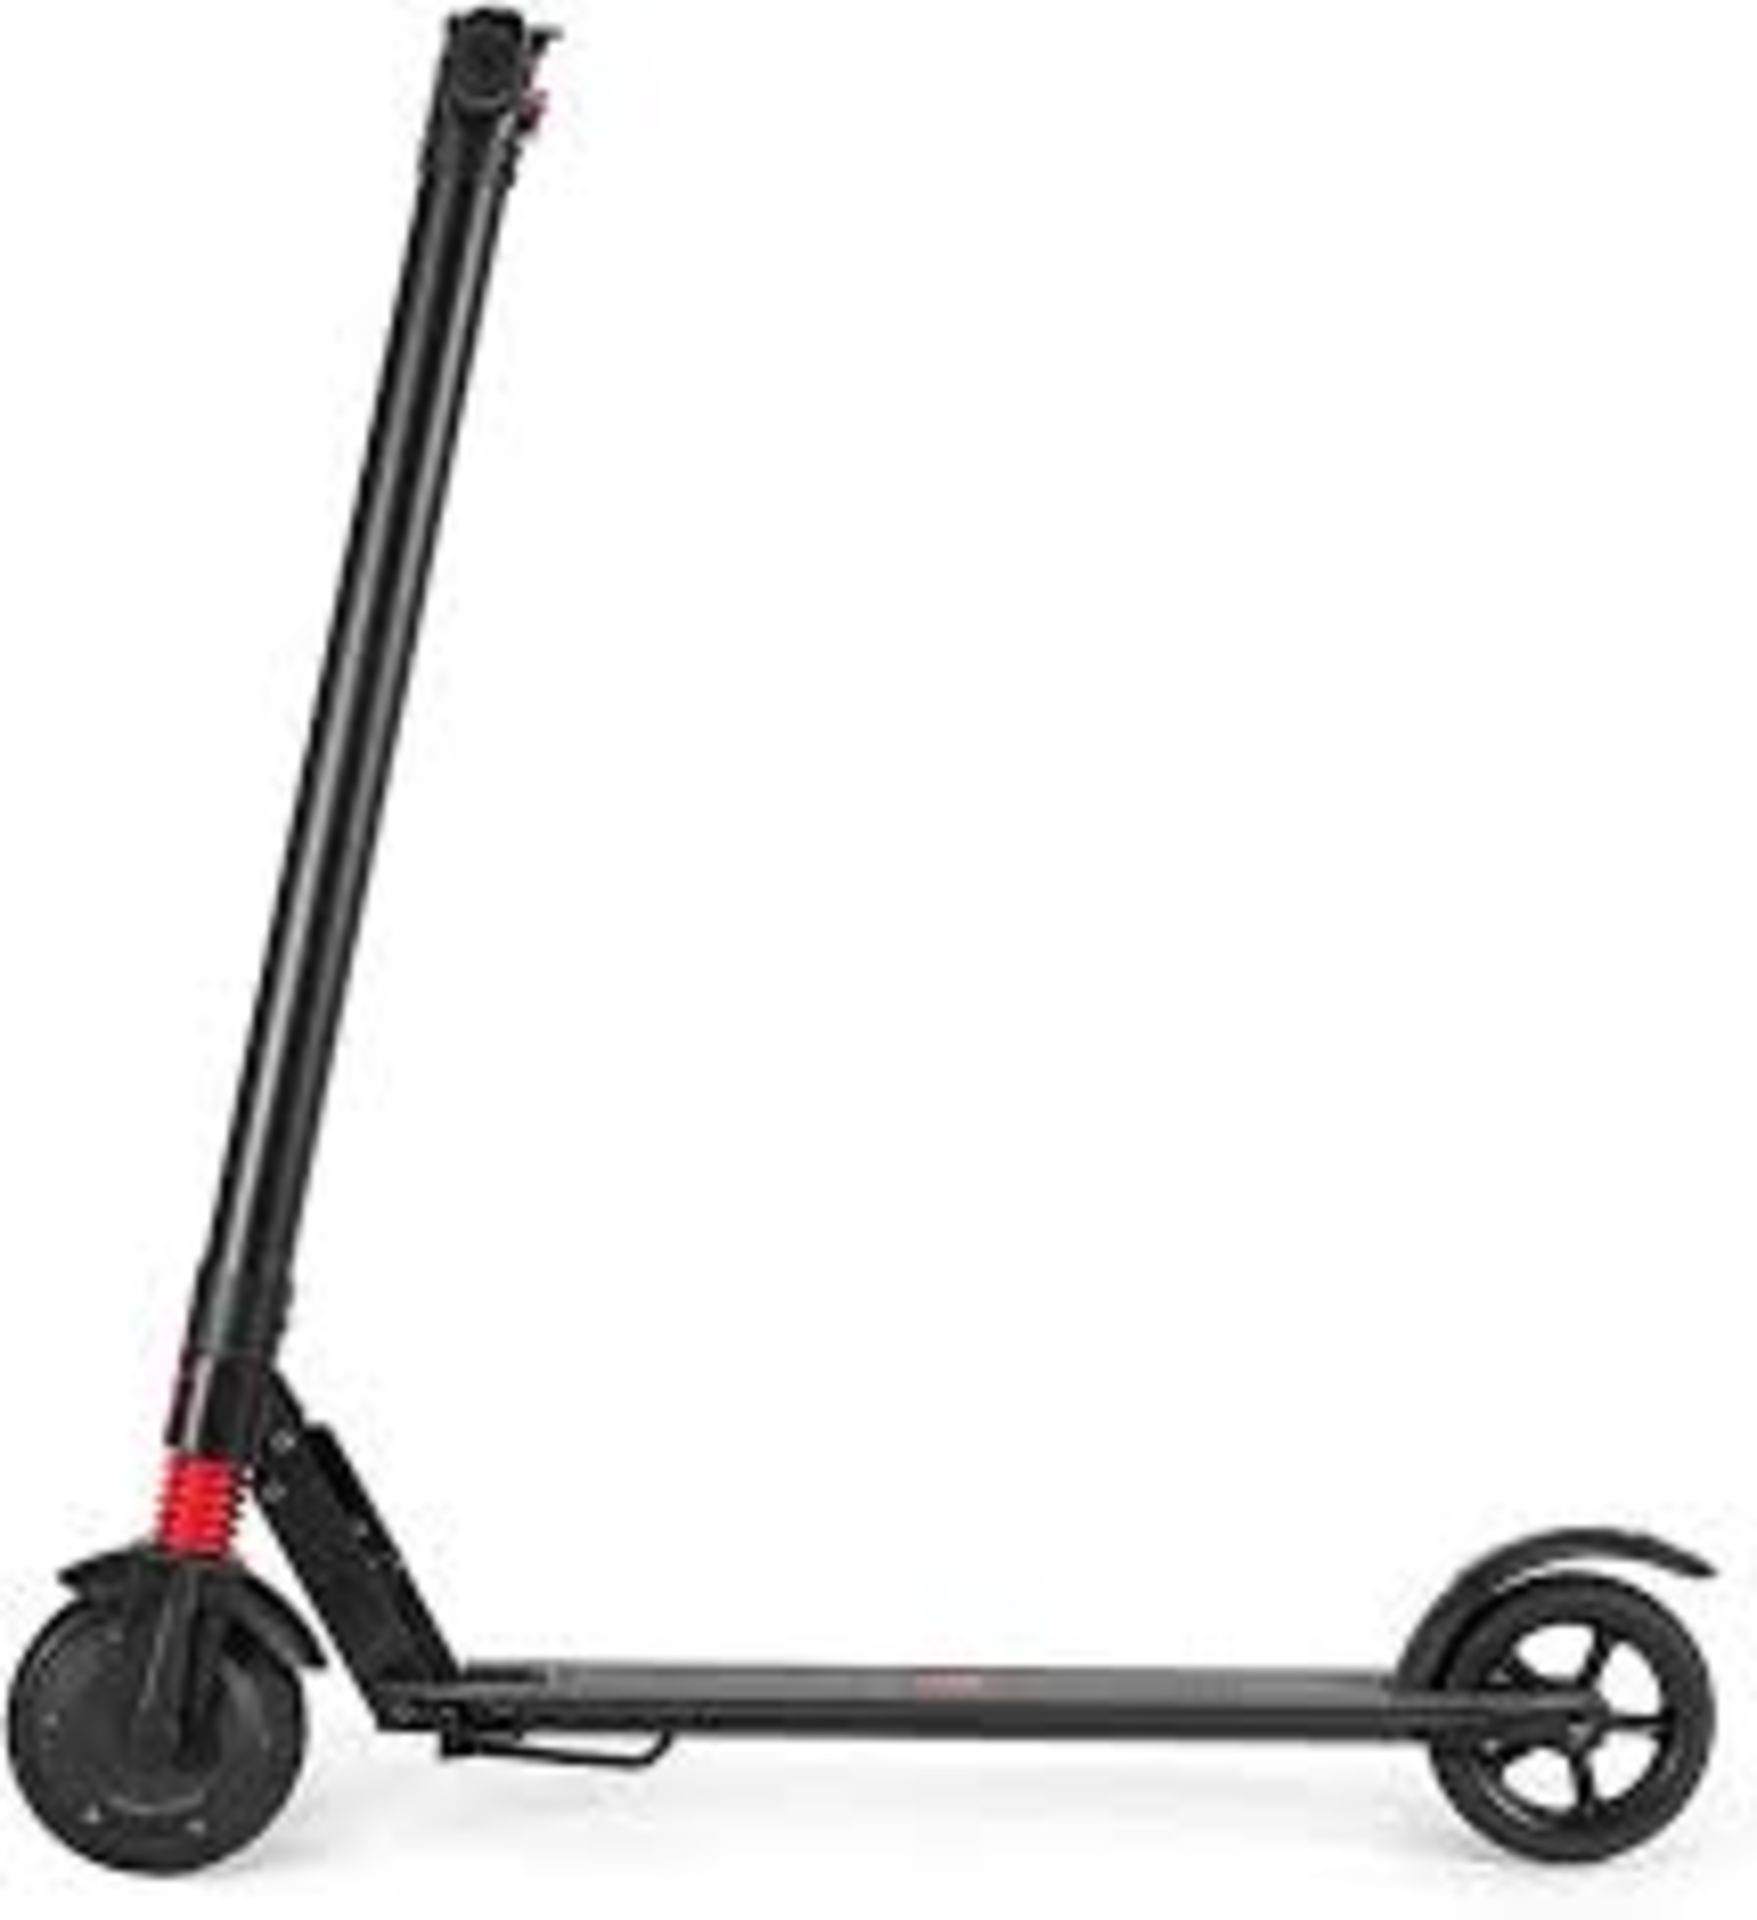 Boxed Street Motion Tech 2 Street Electric Scooter RRP £200